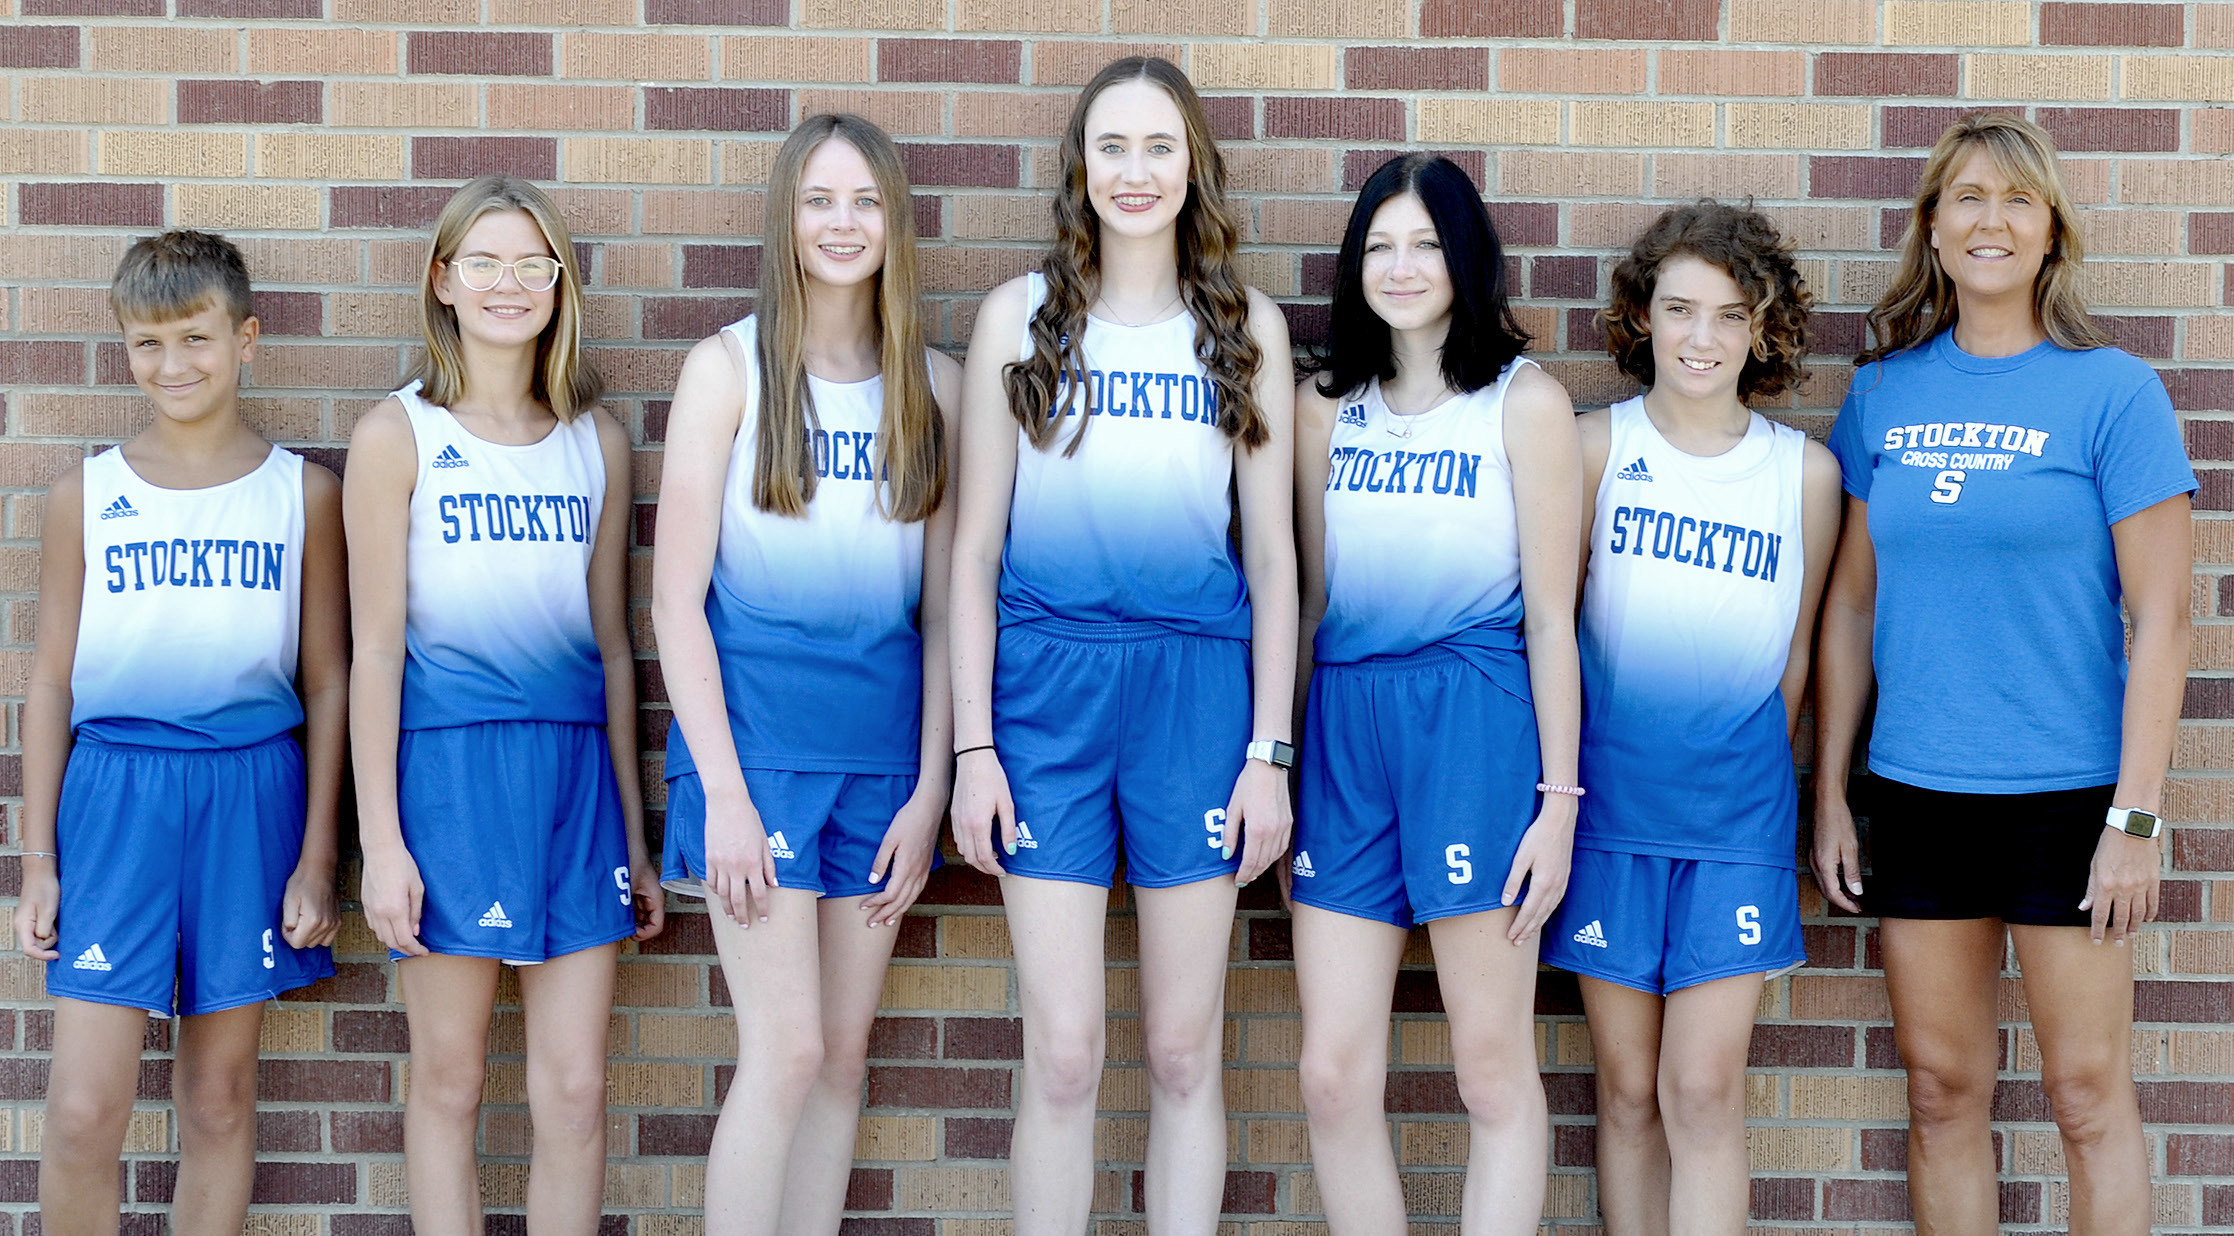 MEMBERS OF THE 2022 STOCKTON HIGH SCHOOL AND JUNIOR HIGH CROSS COUNTRY TEAMS are from left: Kolt Kuhlmann (SJH), Ariel Sager, Cheyenne Hoeting, Cappi Hoeting, Ryleigh Gardner, Christine Jurgens (SJH) and Janet Kuhlmann (head coach).